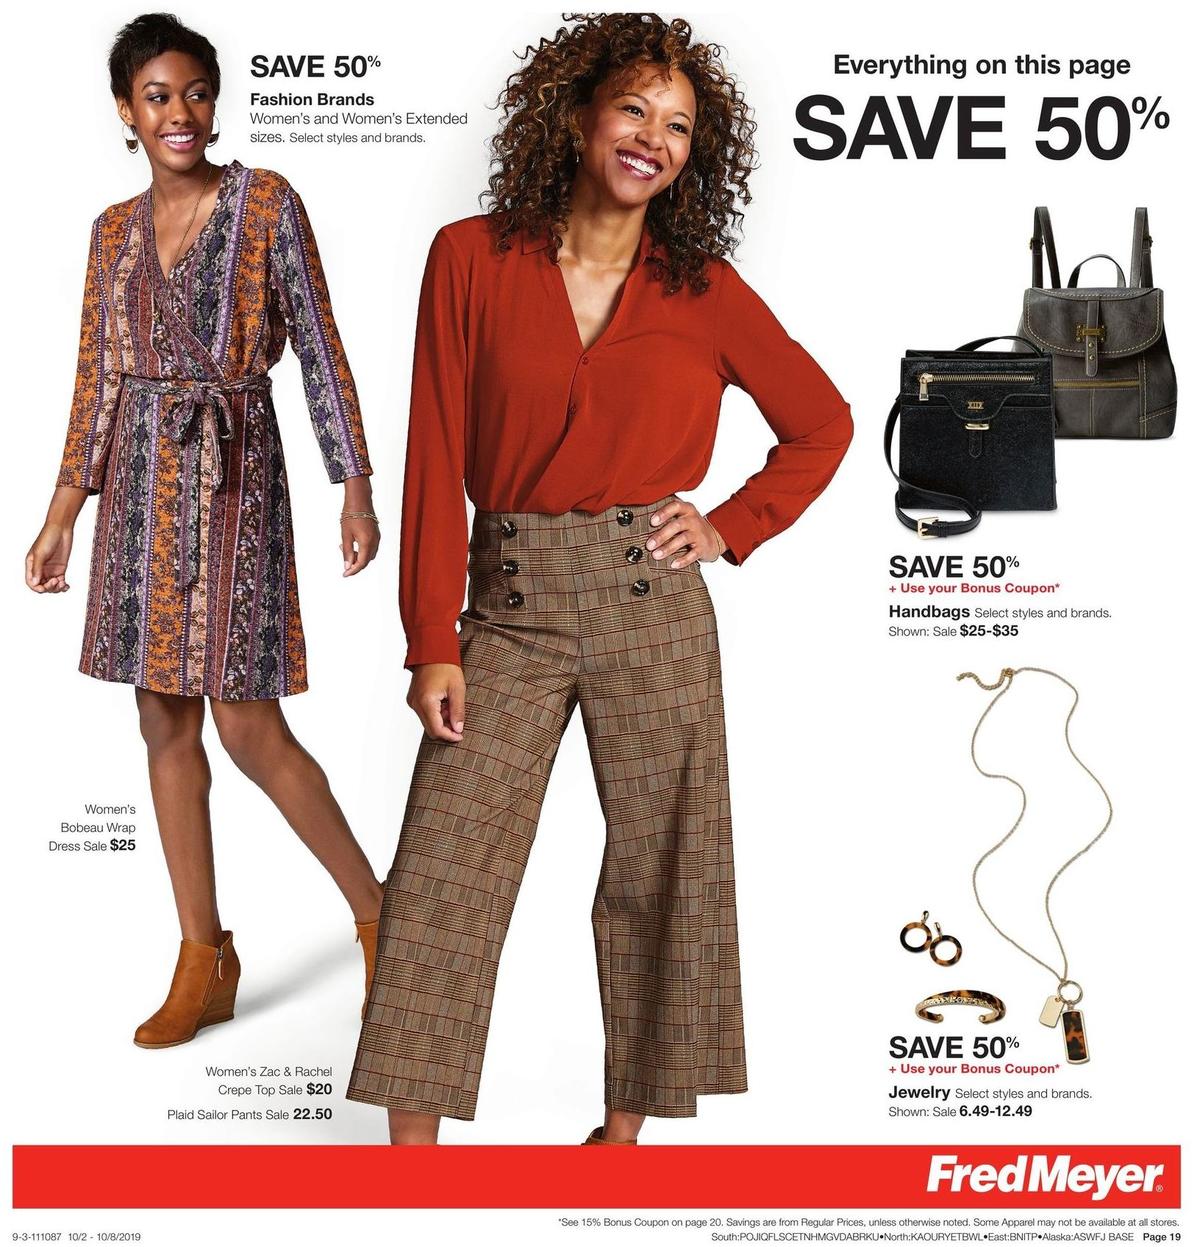 Fred Meyer General Merchandise Weekly Ad from October 2